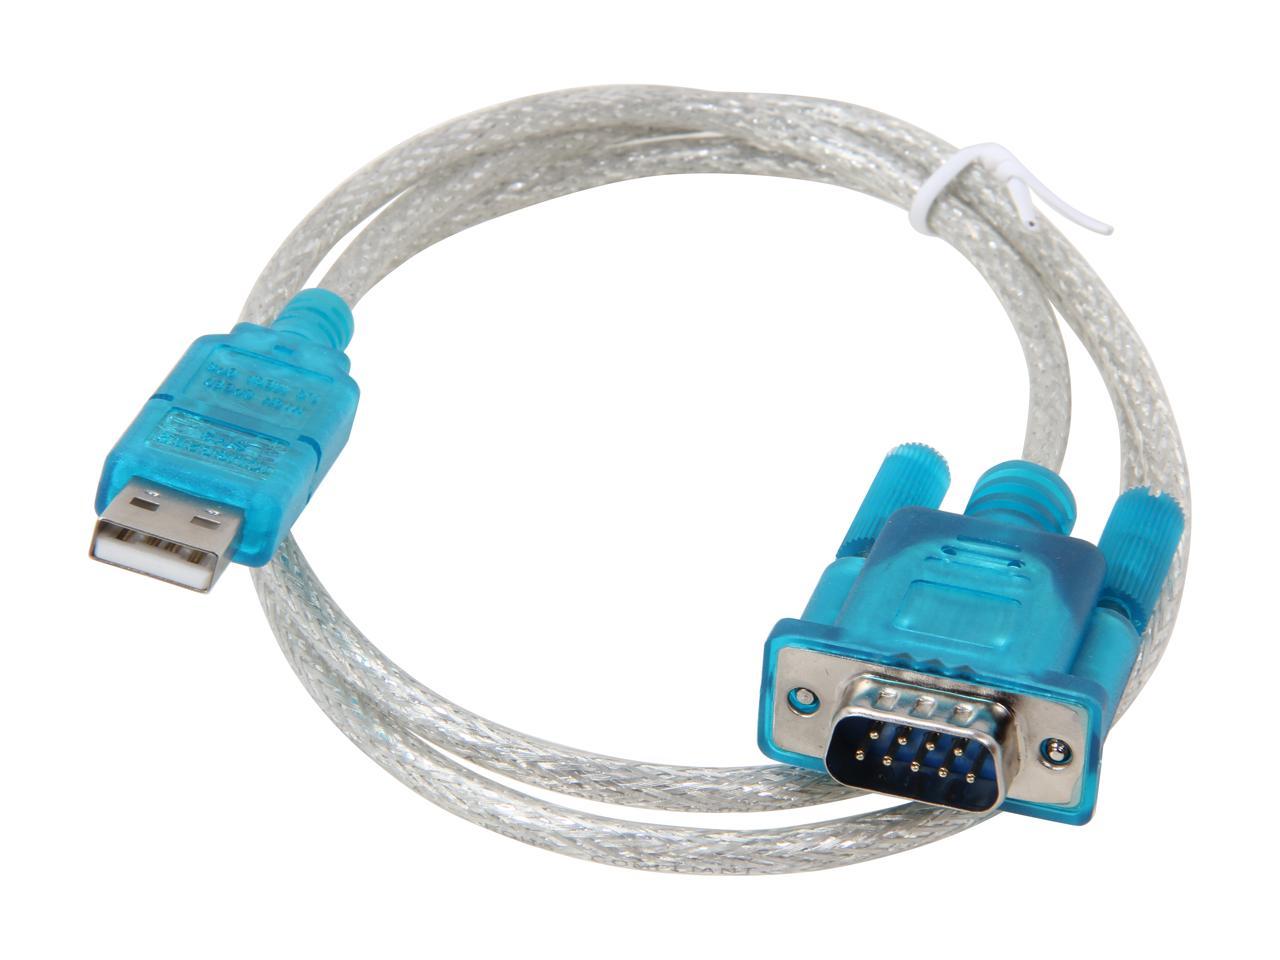 Icusb232sm3 Usb To Serial Adapter Prolific Pl 2303 3 1674